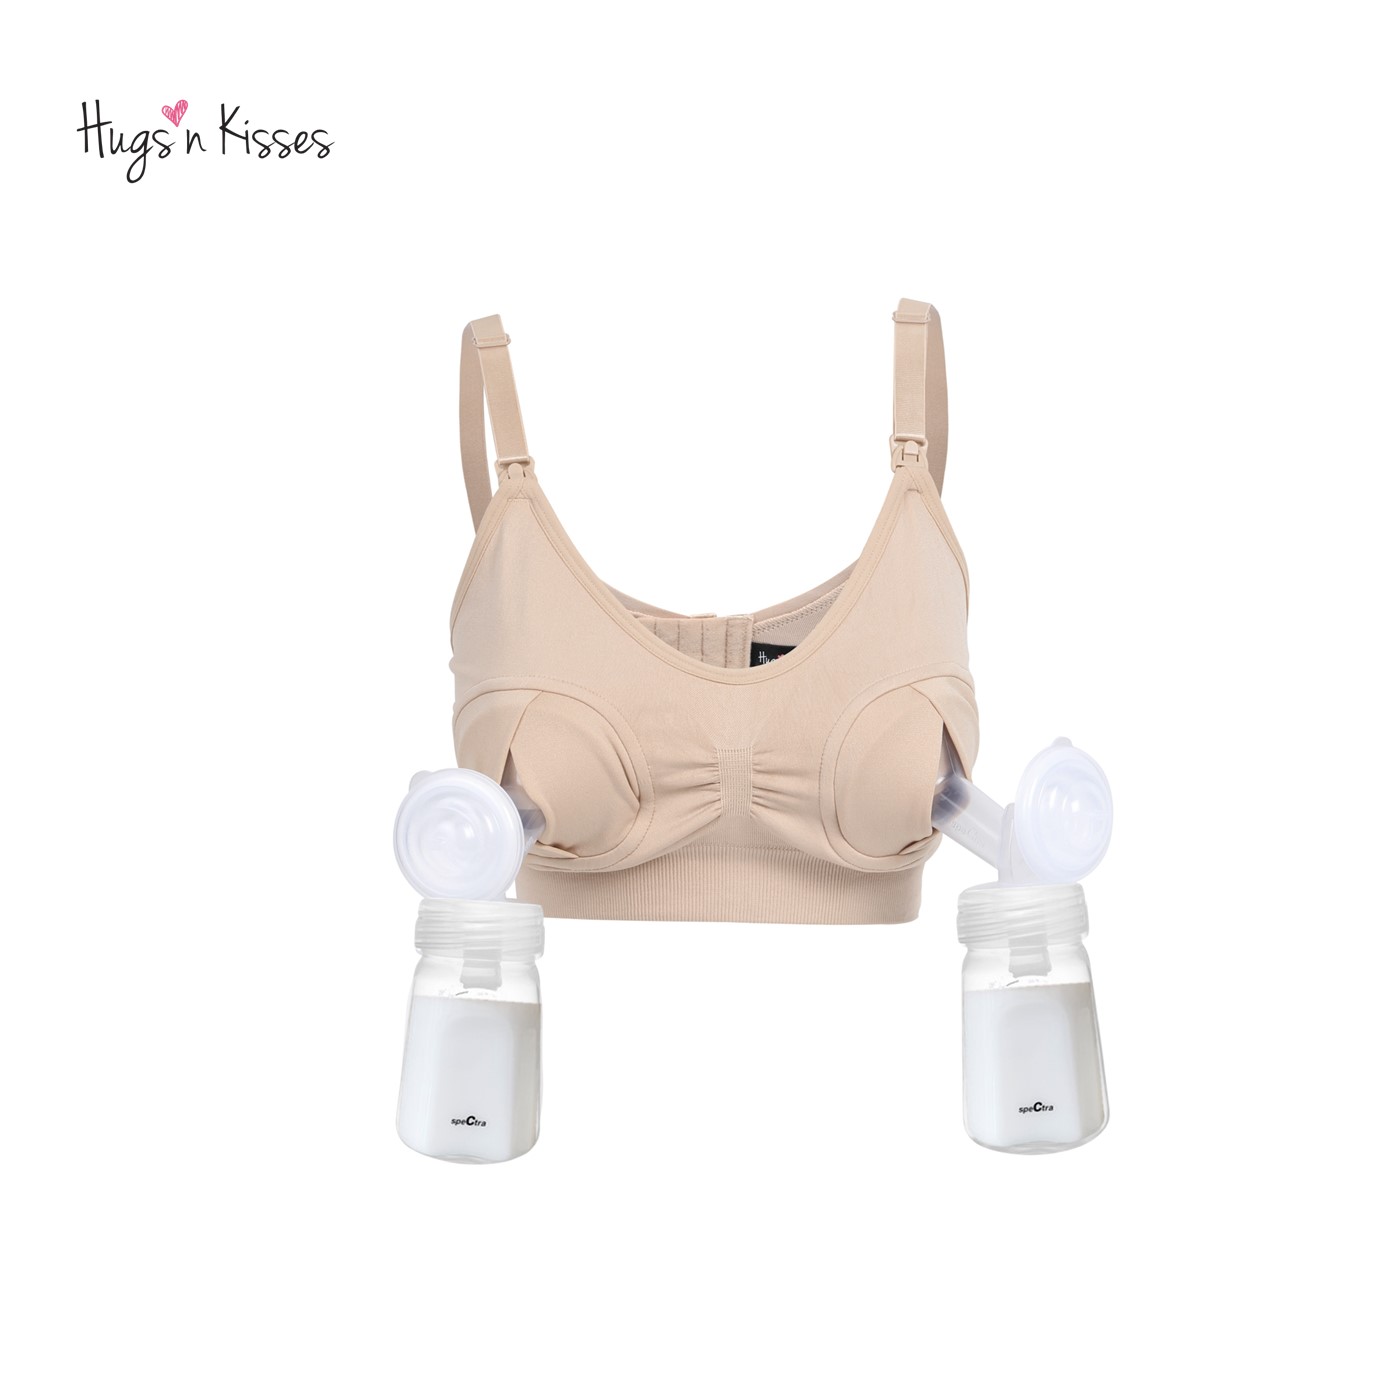 Hands Free Pumping Bra Adjustable Breast-Pumps Holding,with